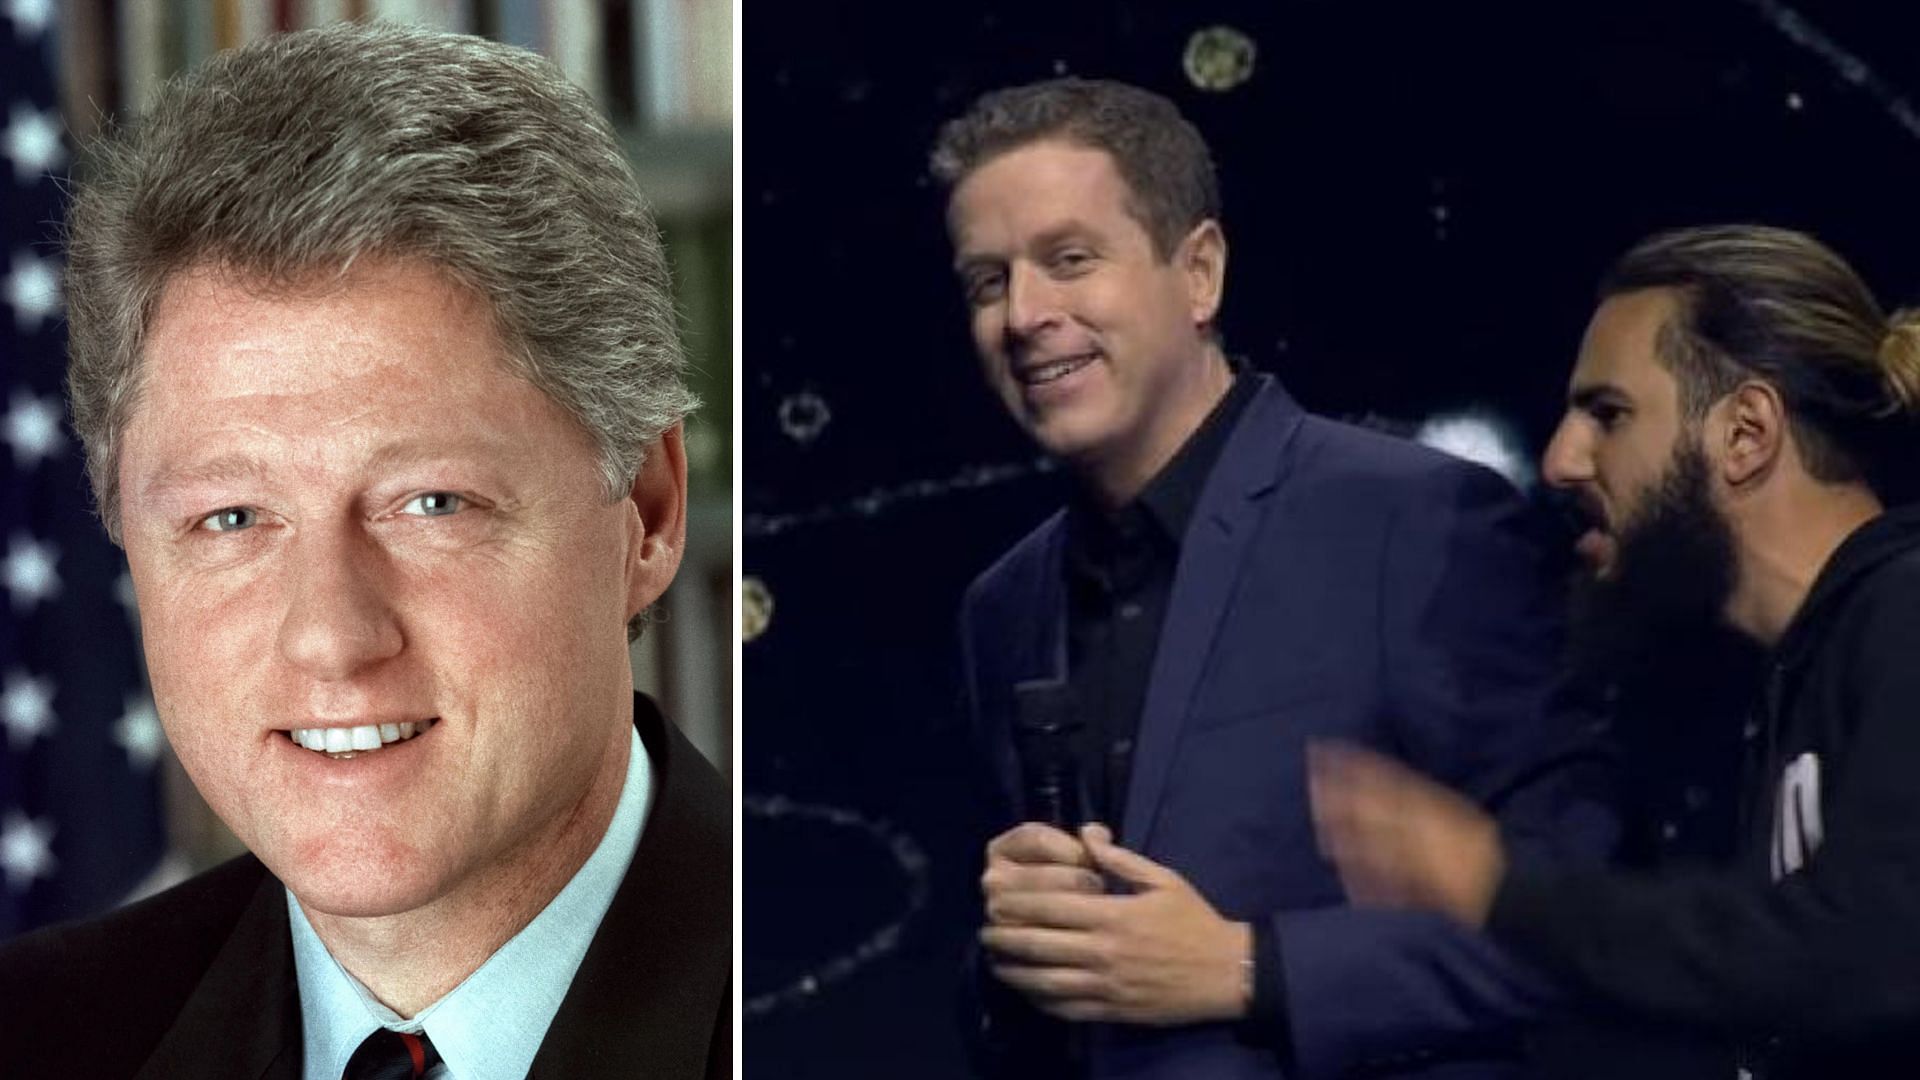 Apparently, Bill Clinton cannot wait to play GTA 6